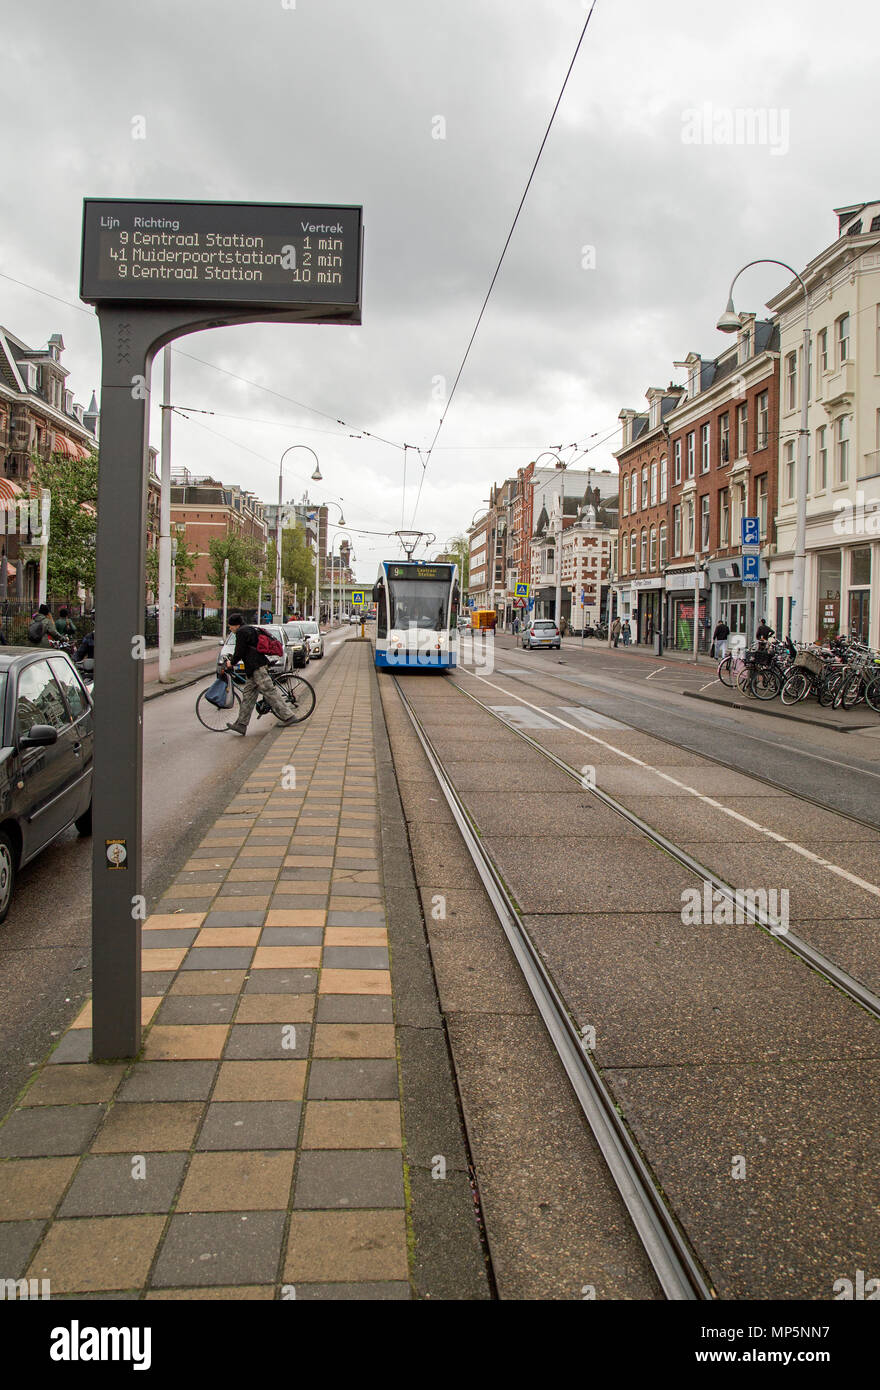 Amsterdam Holland April 2018 A Tramway System Makes Public Transport Easy In The City MP5NN7 